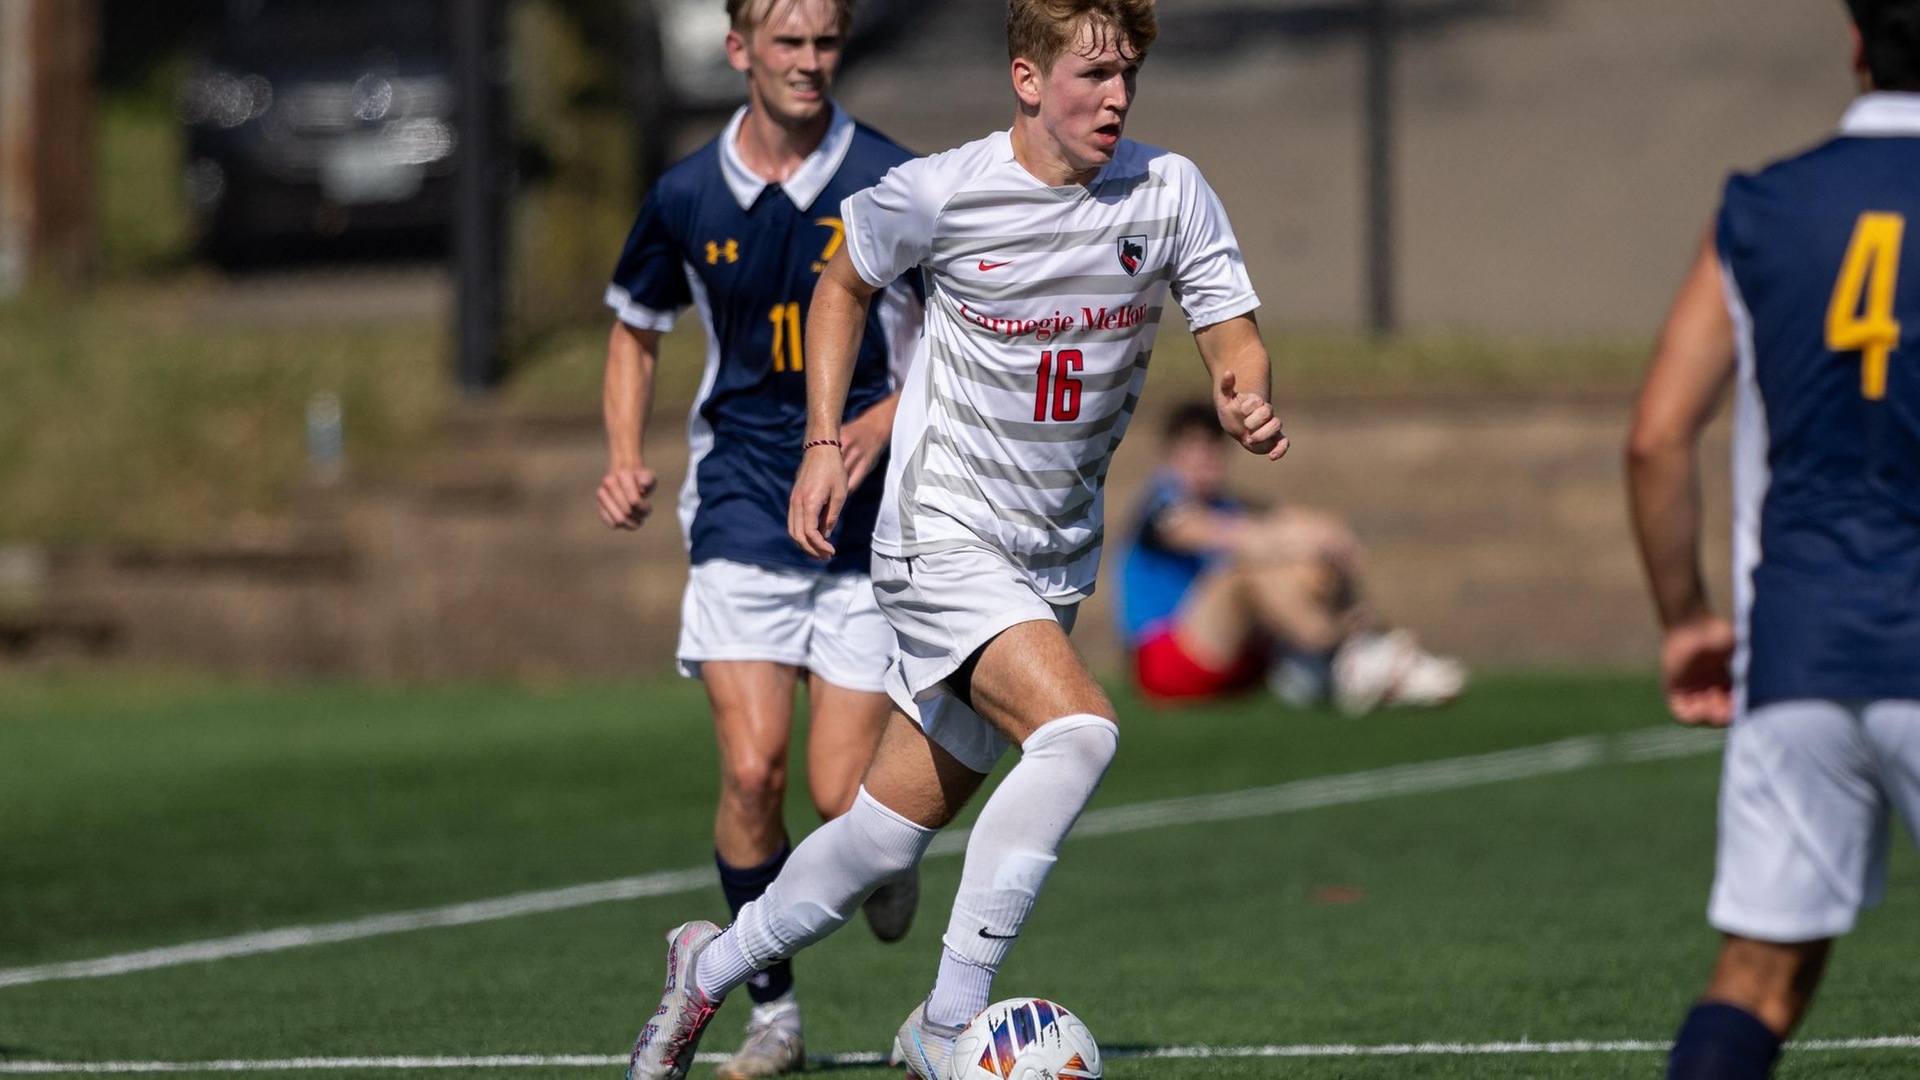 men's soccer player wearing a white uniform has ball at right foot 